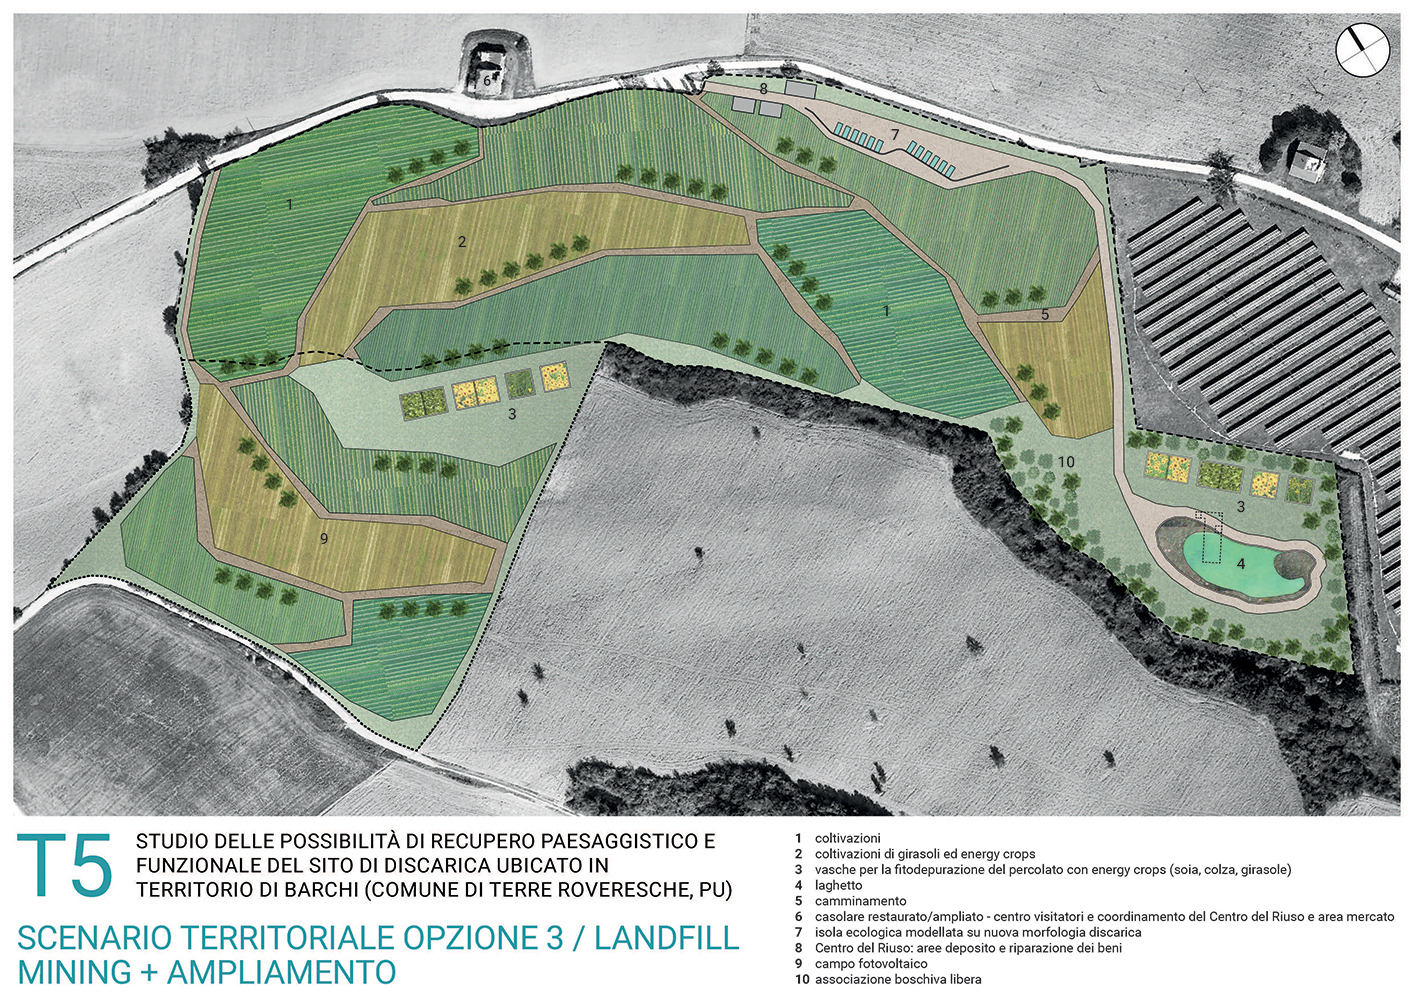 Landscape and functional requalification of the landfill of Ca’ Rafaneto, Barchi (PU)